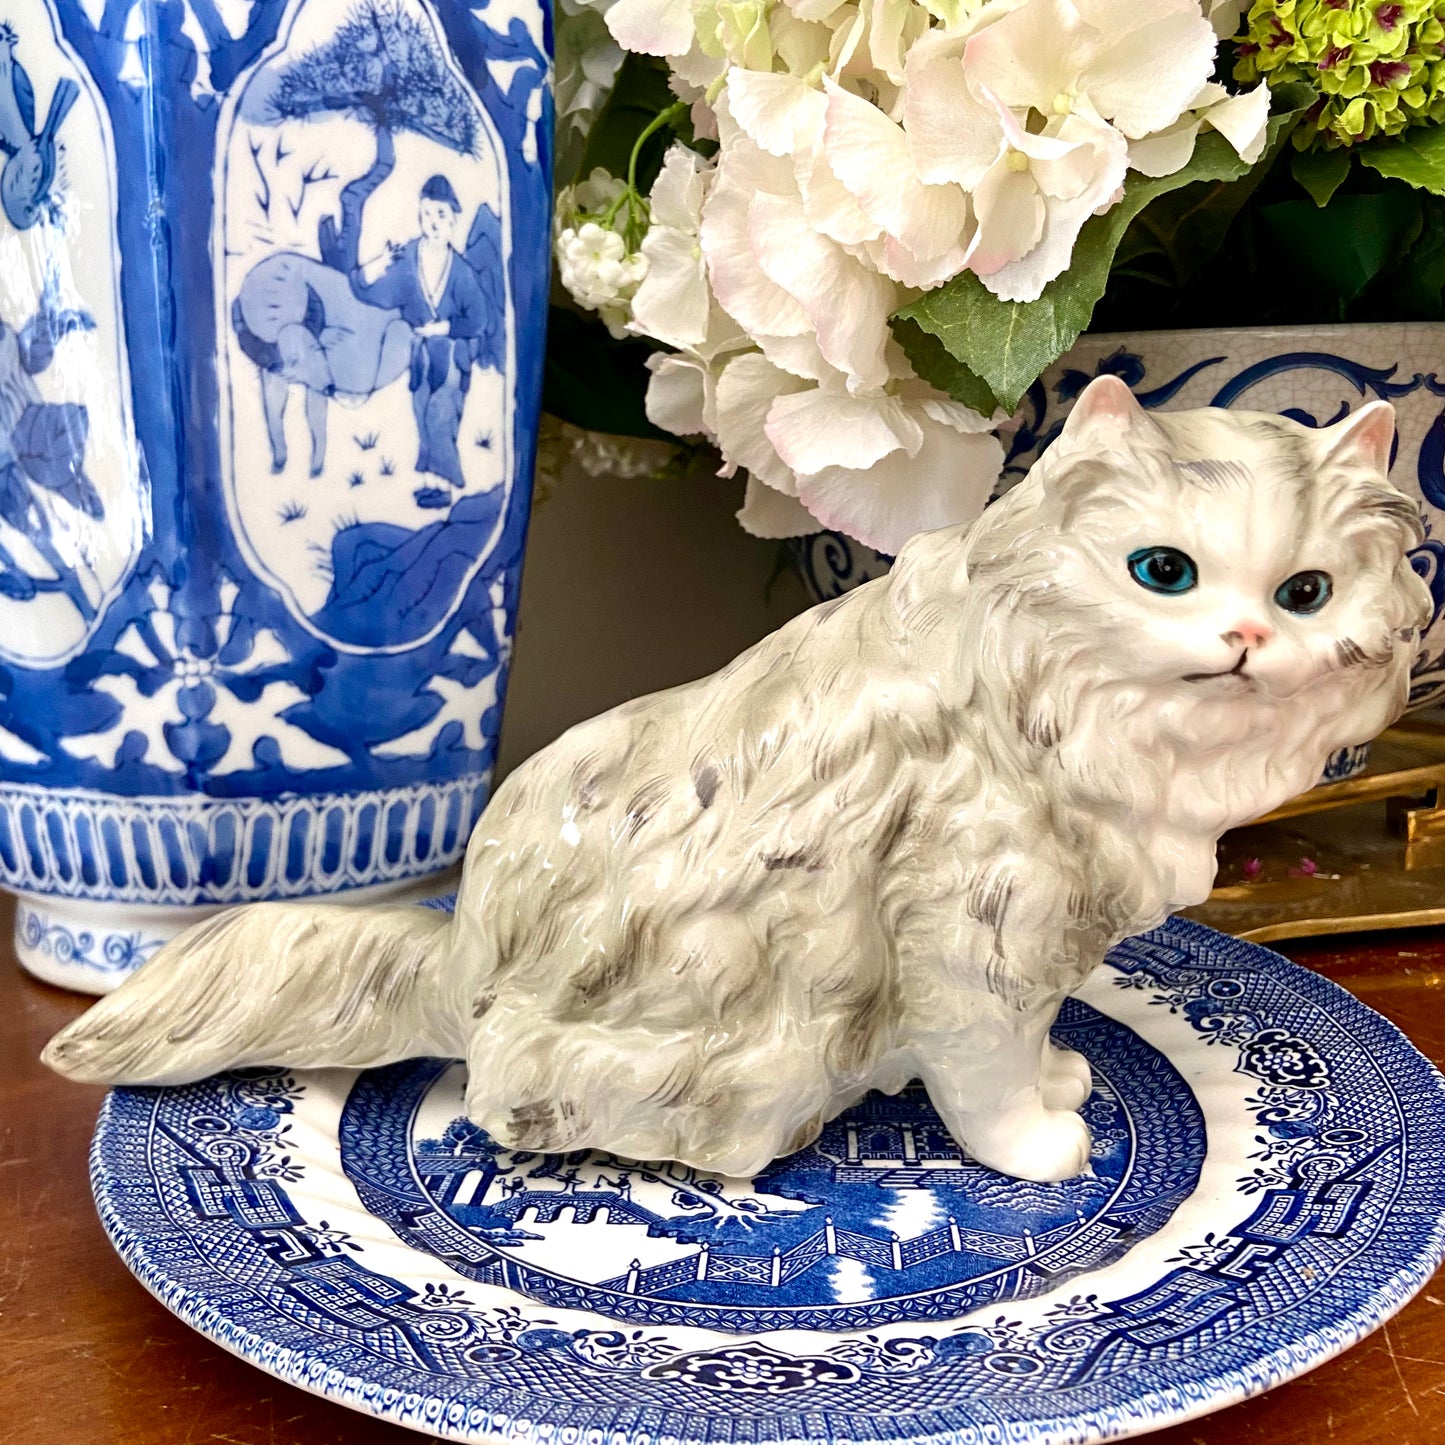 Vintage porcelain ivory large Persian kitty cat statue figurine